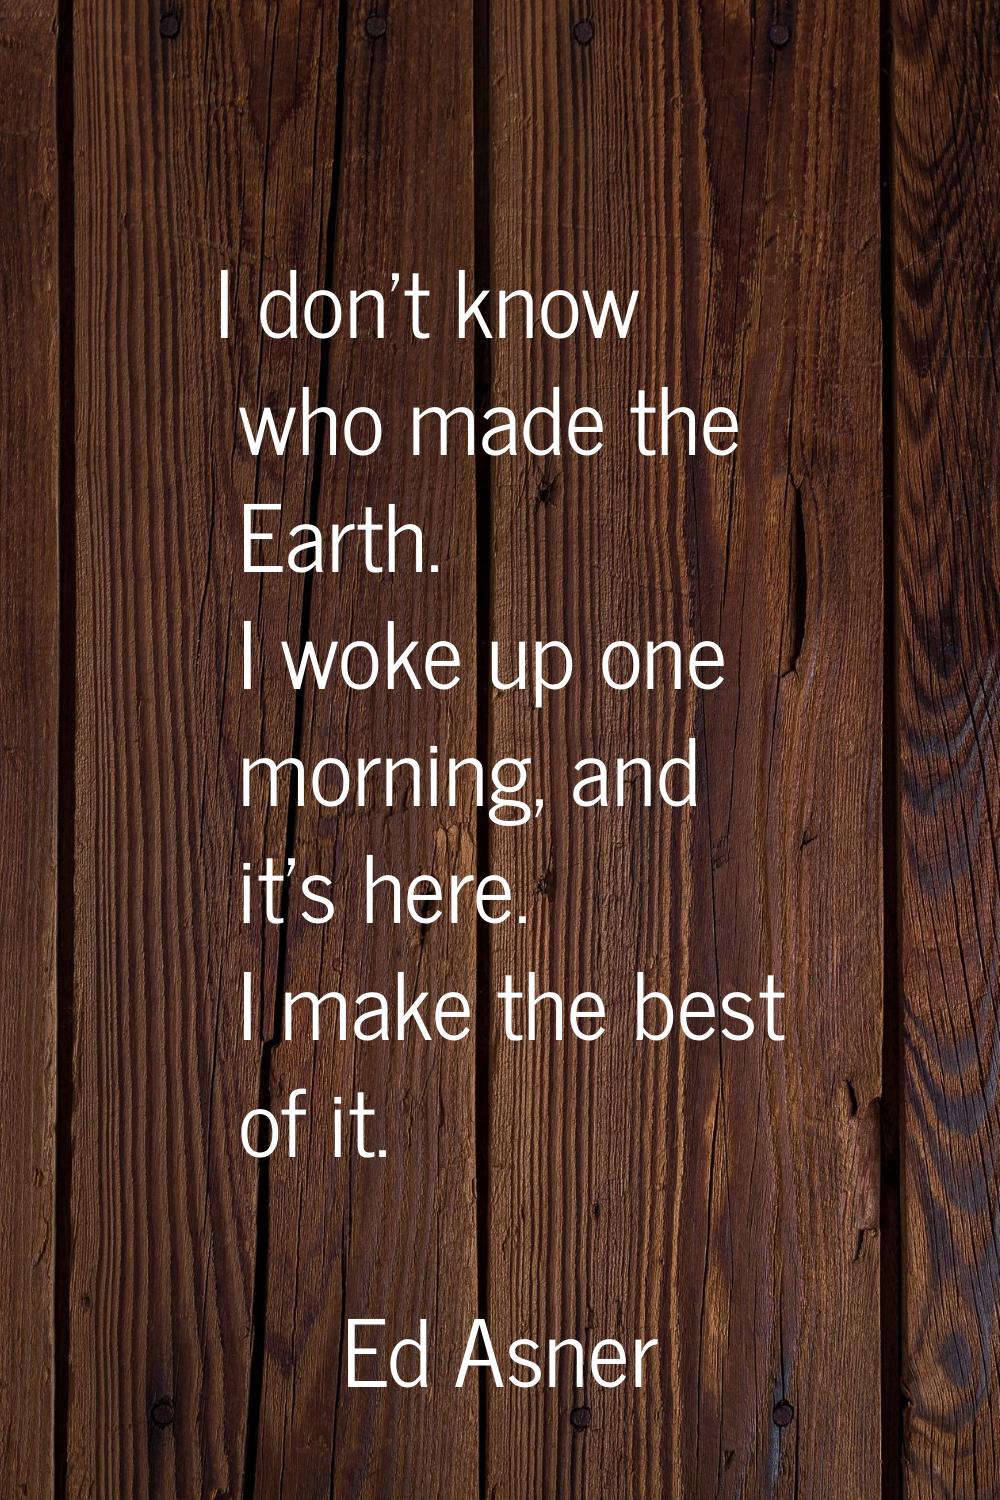 I don't know who made the Earth. I woke up one morning, and it's here. I make the best of it.